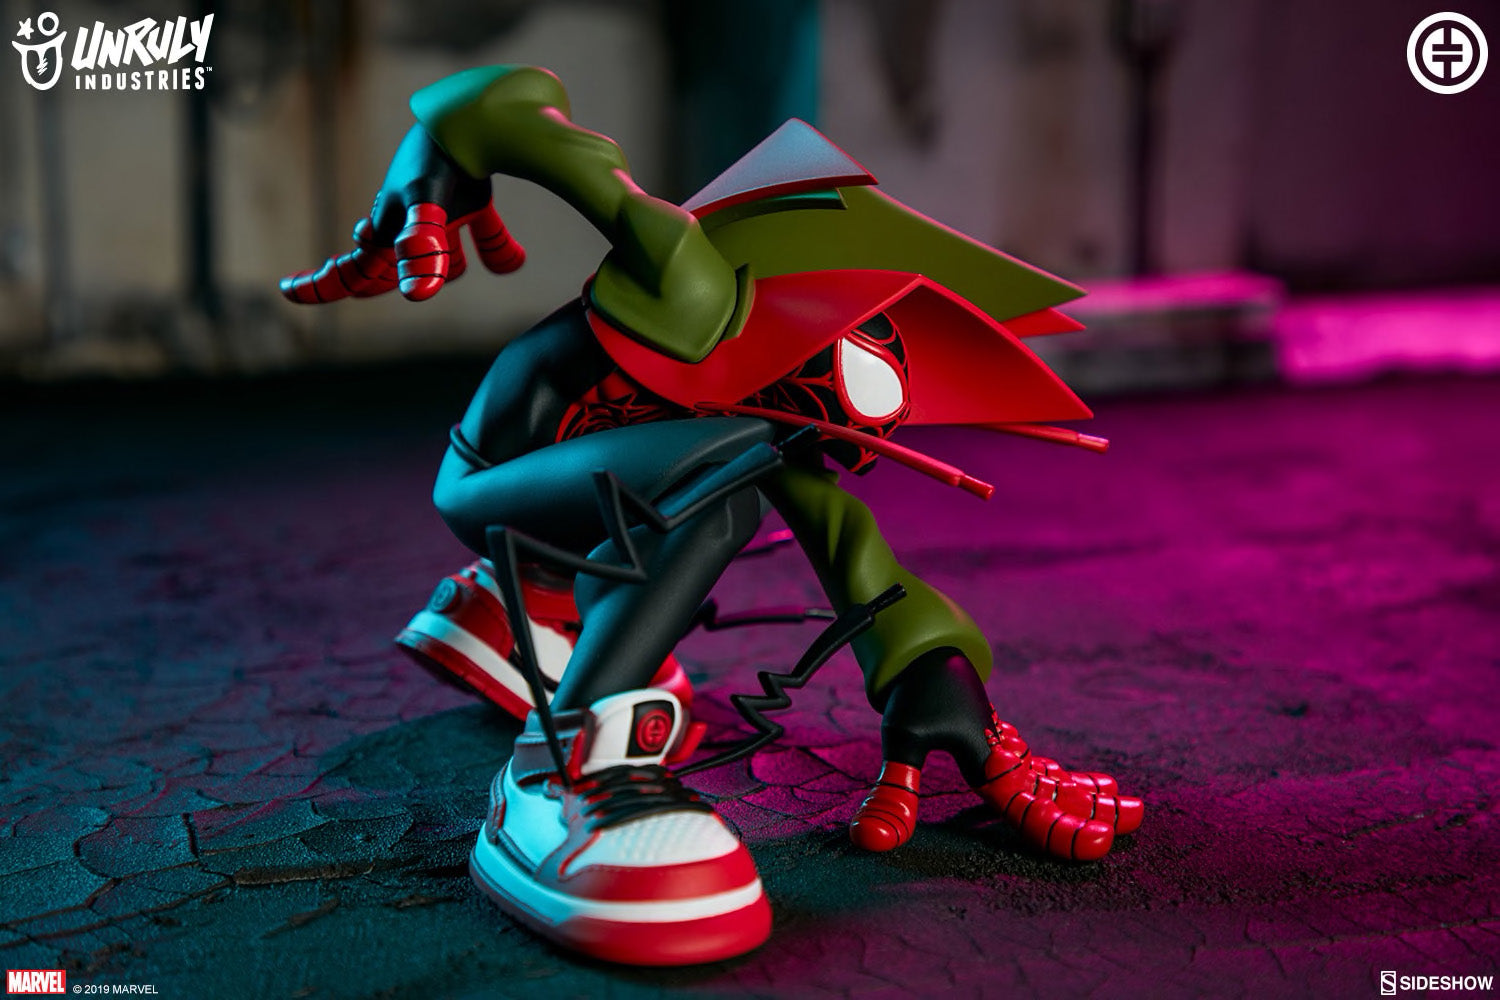 Sideshow Collectibles - Unruly Industries - Marvel - Miles Morales (Spider-Man) by Tracy Tubera - Marvelous Toys